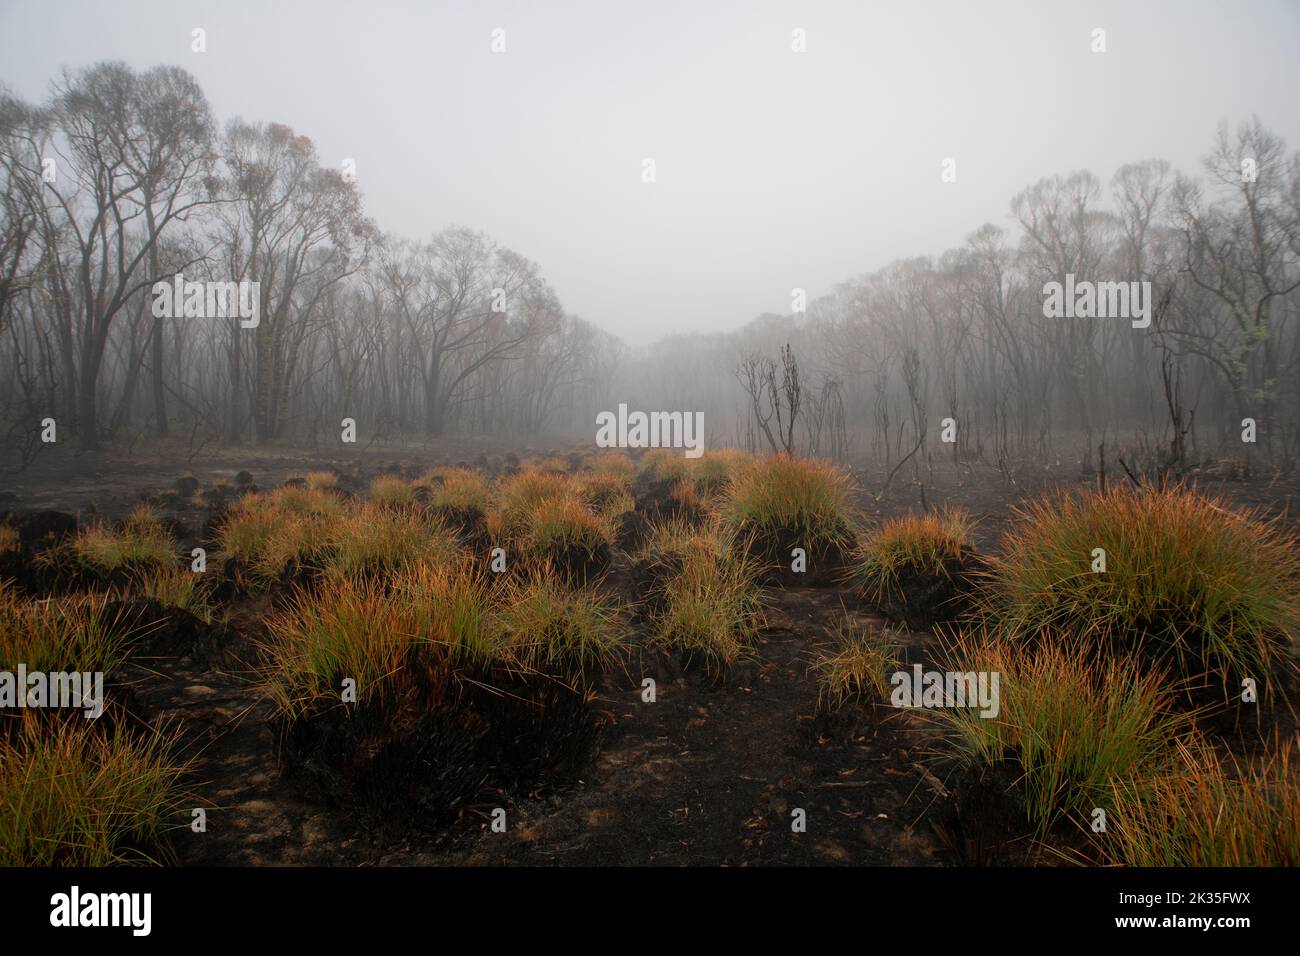 Forest regeneration in the fog, after a bushfire in Tonimbuk, Australia. Heathland with button grasses. Stock Photo